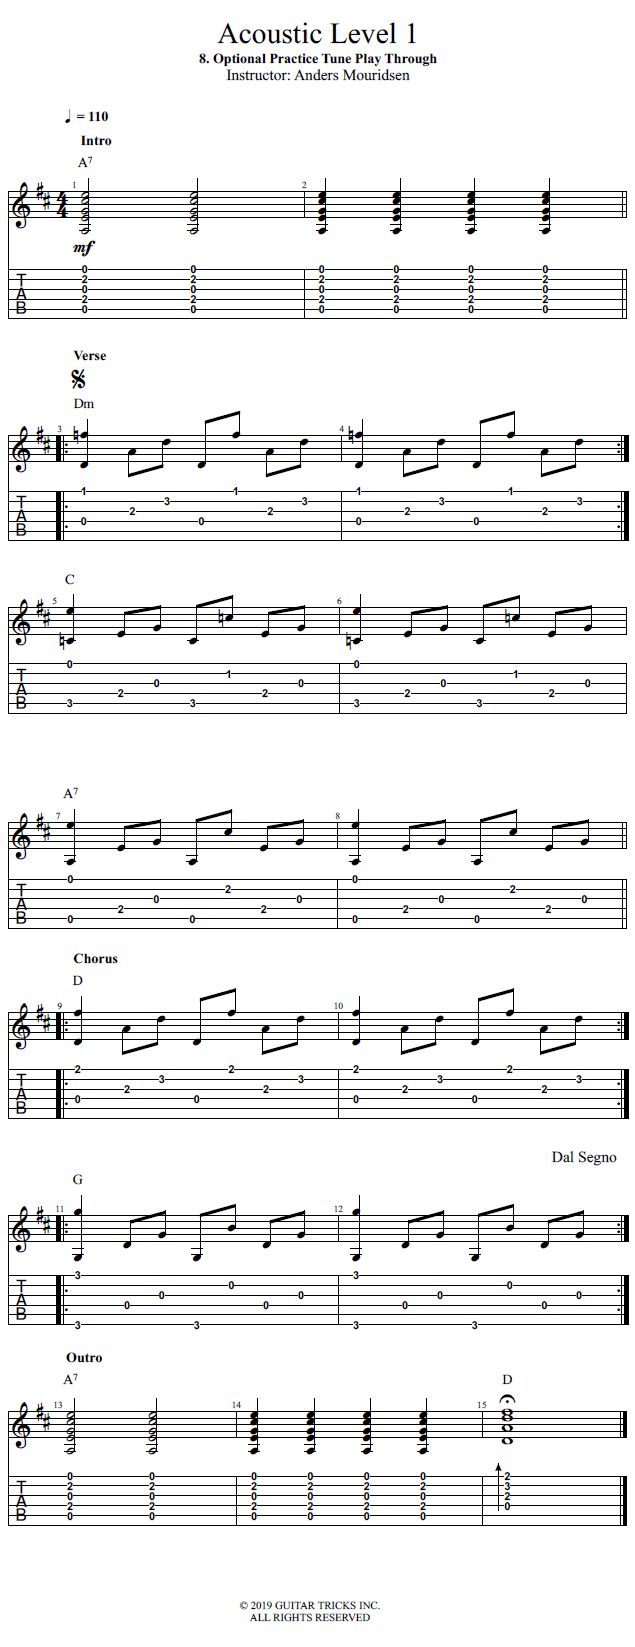 Optional Practice Tune Play Through song notation